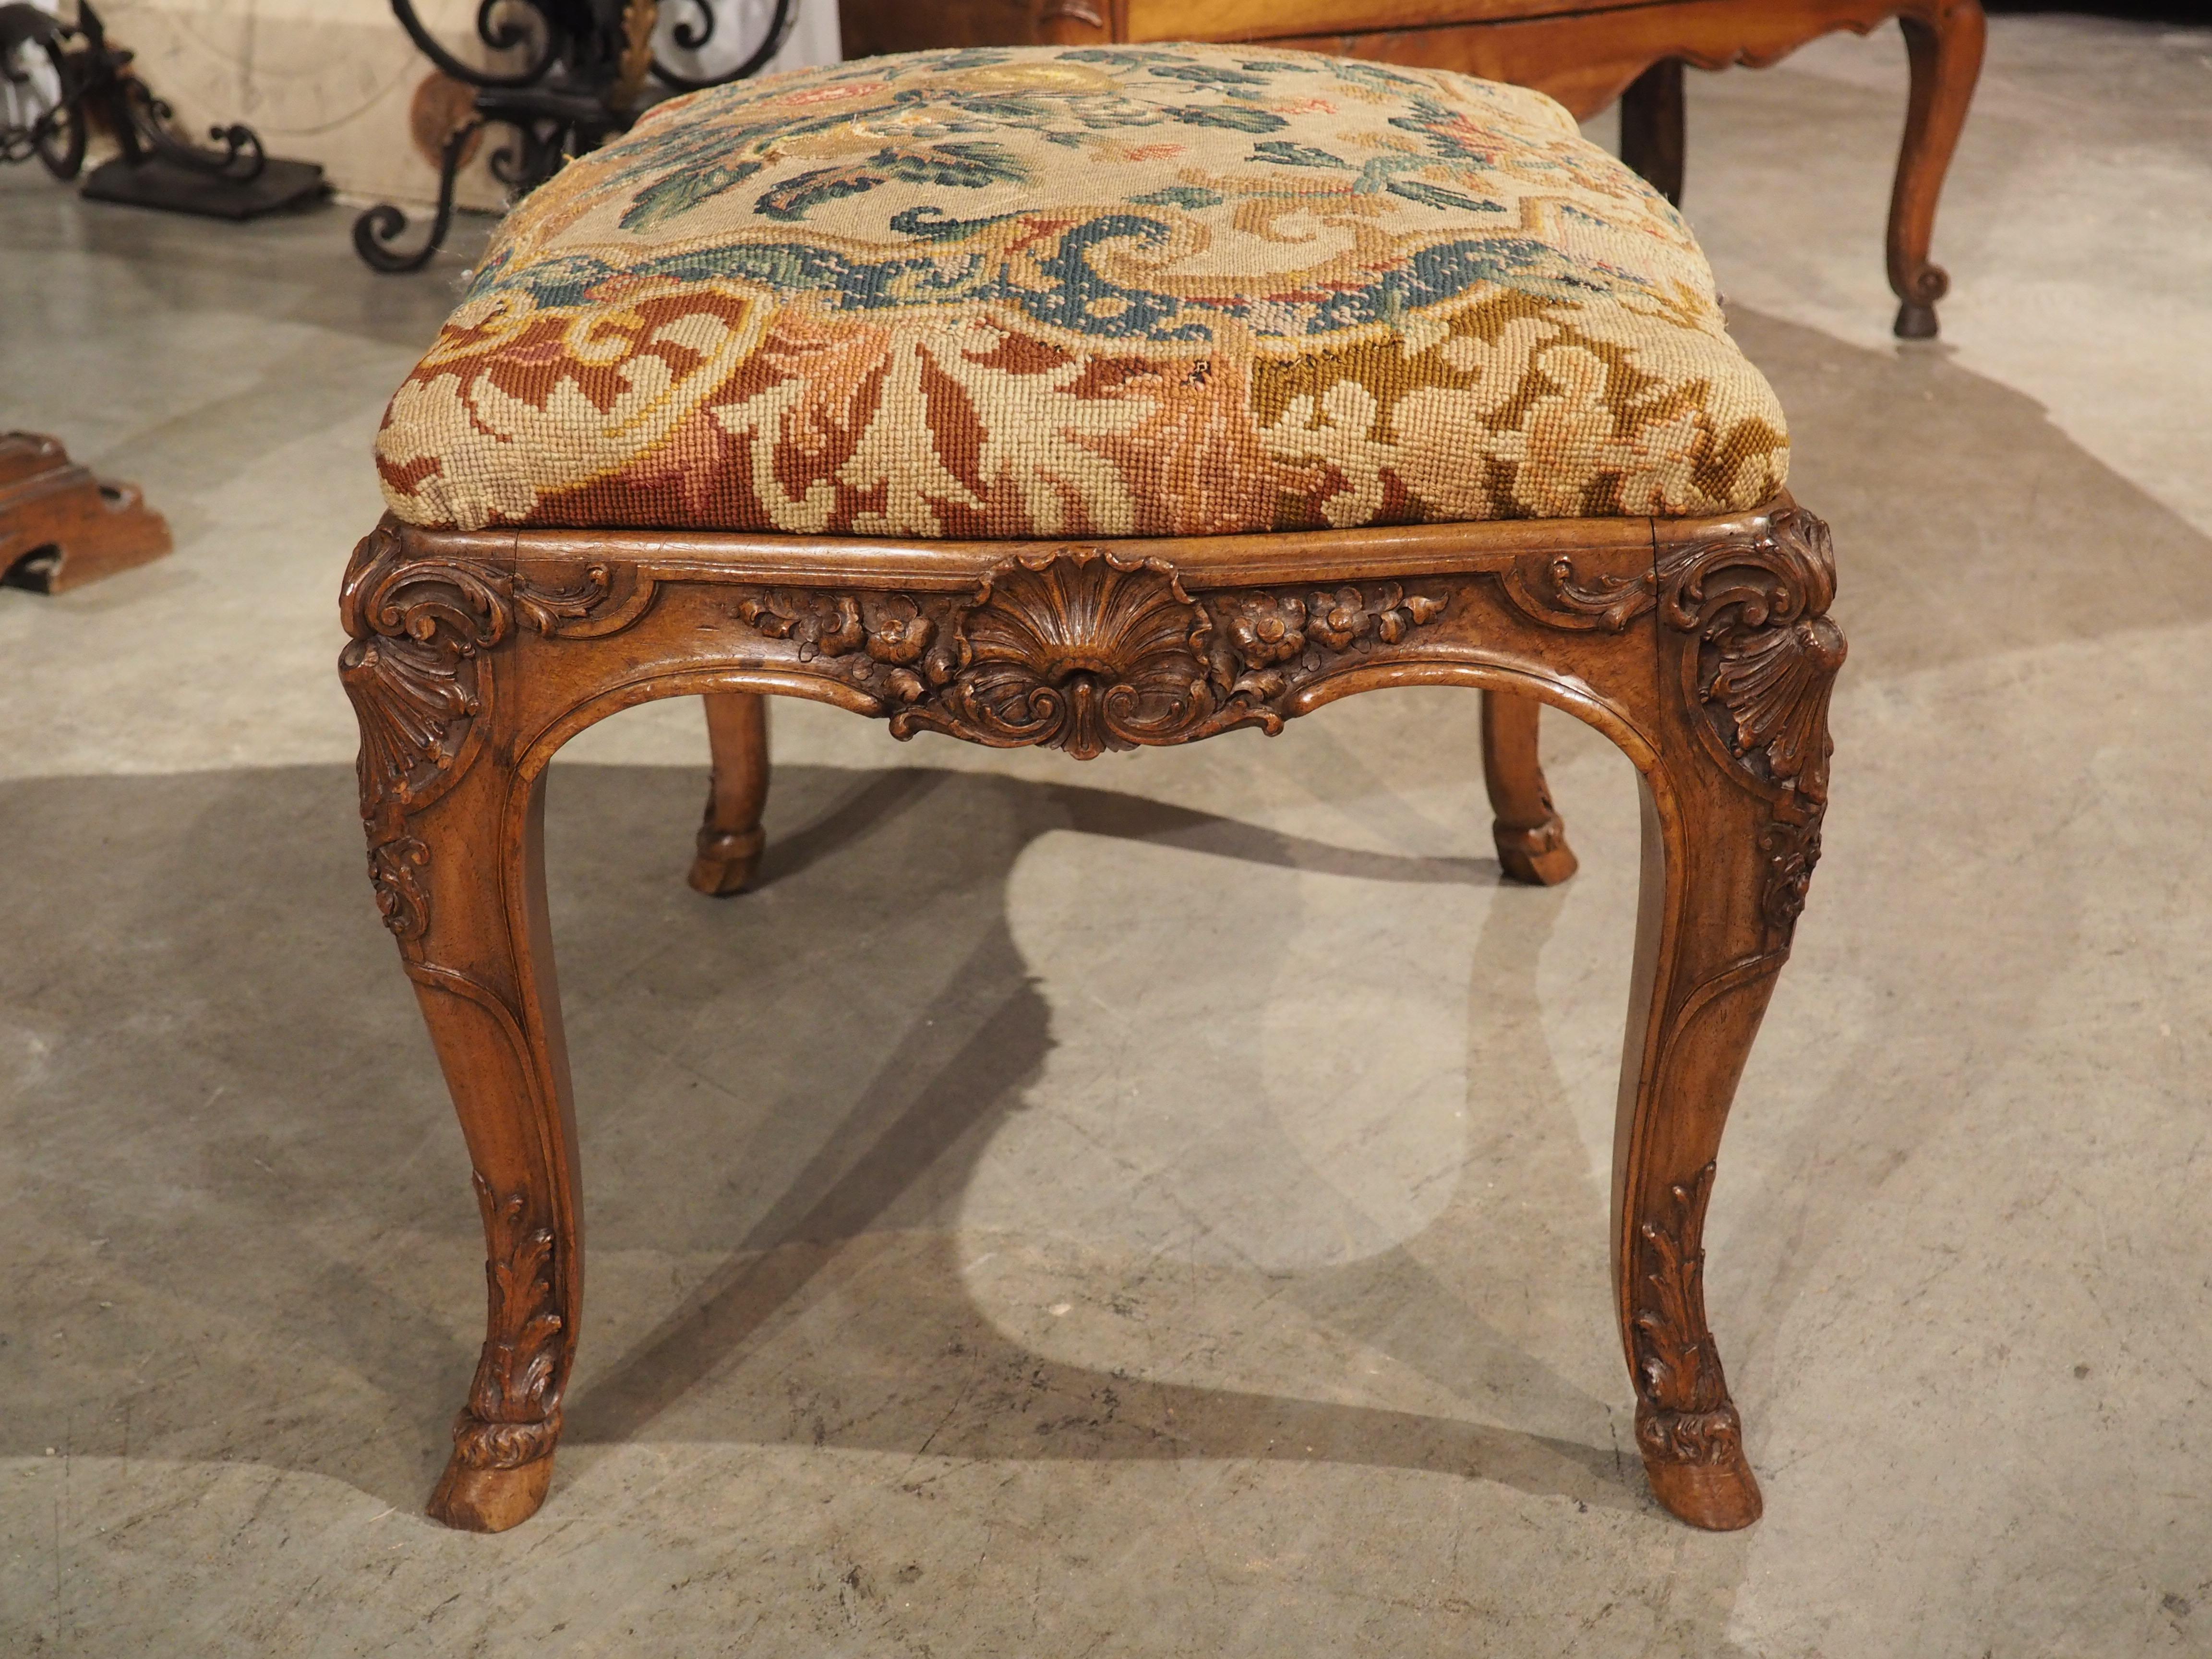 Upholstery 19th Century Regence Tabouret in Carved Walnut by A. Dubois, Le Mans, France For Sale